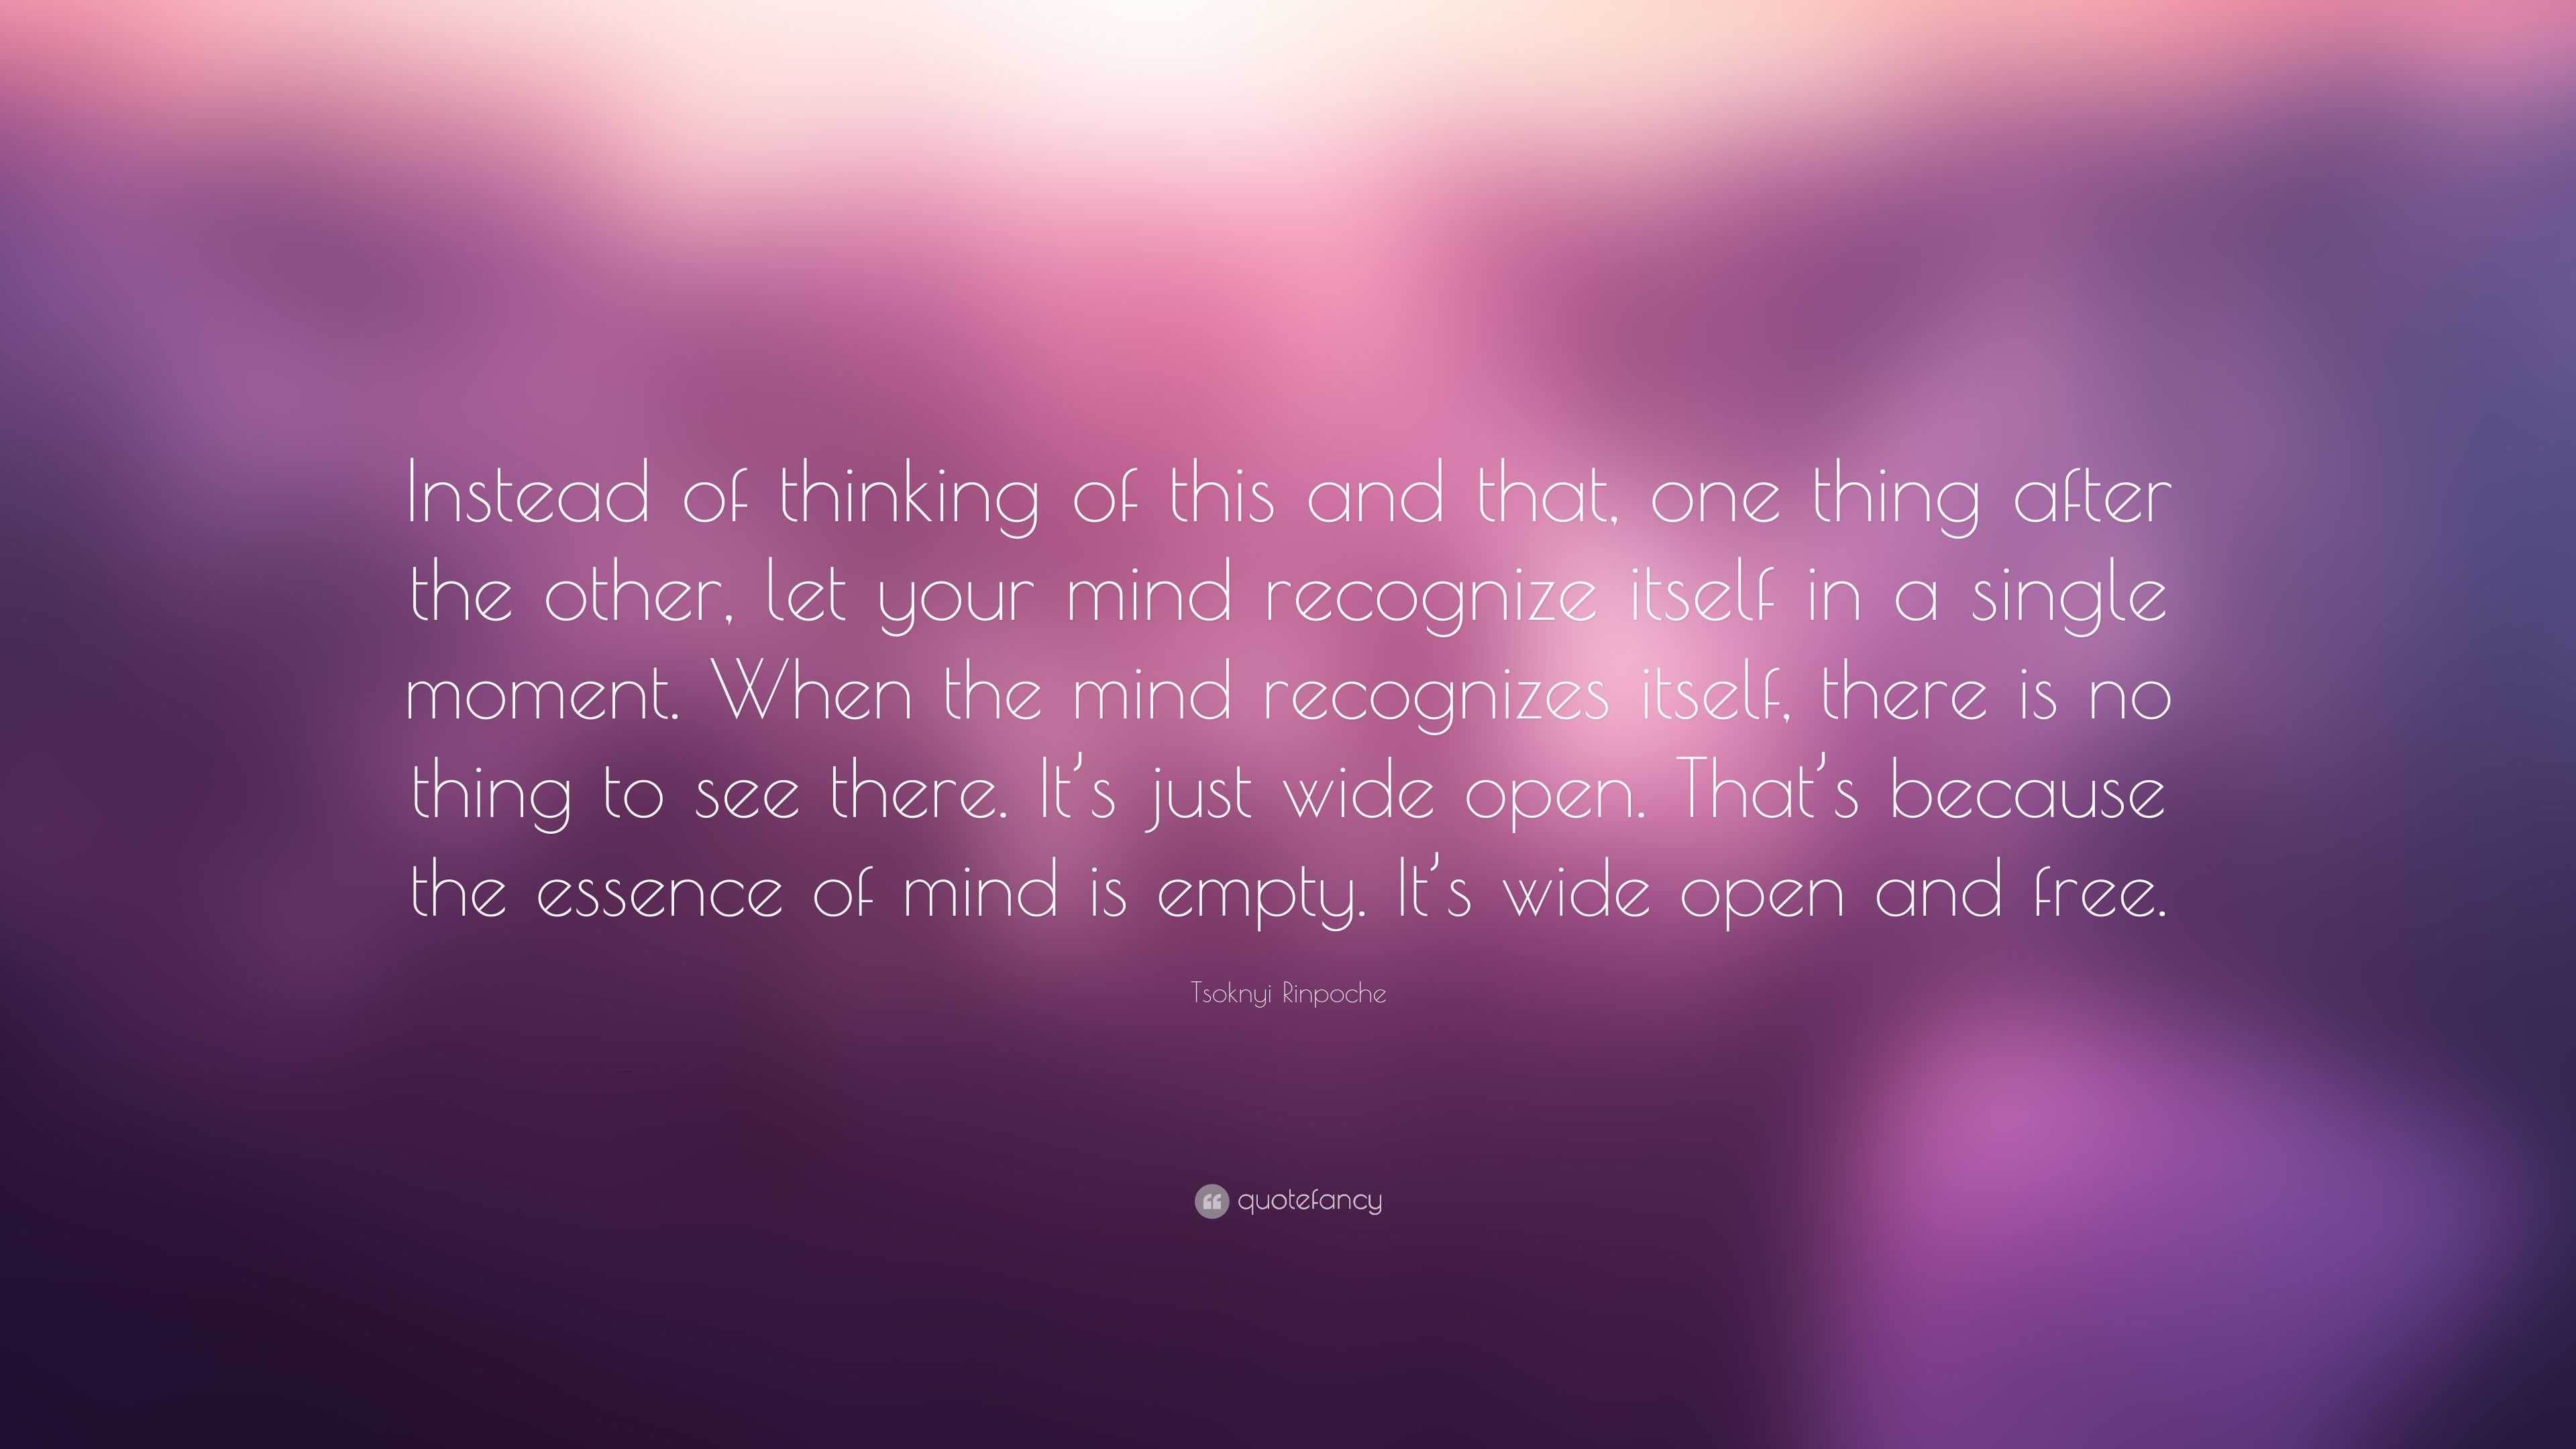 Tsoknyi Rinpoche Quote: “Instead of thinking of this and that, one ...